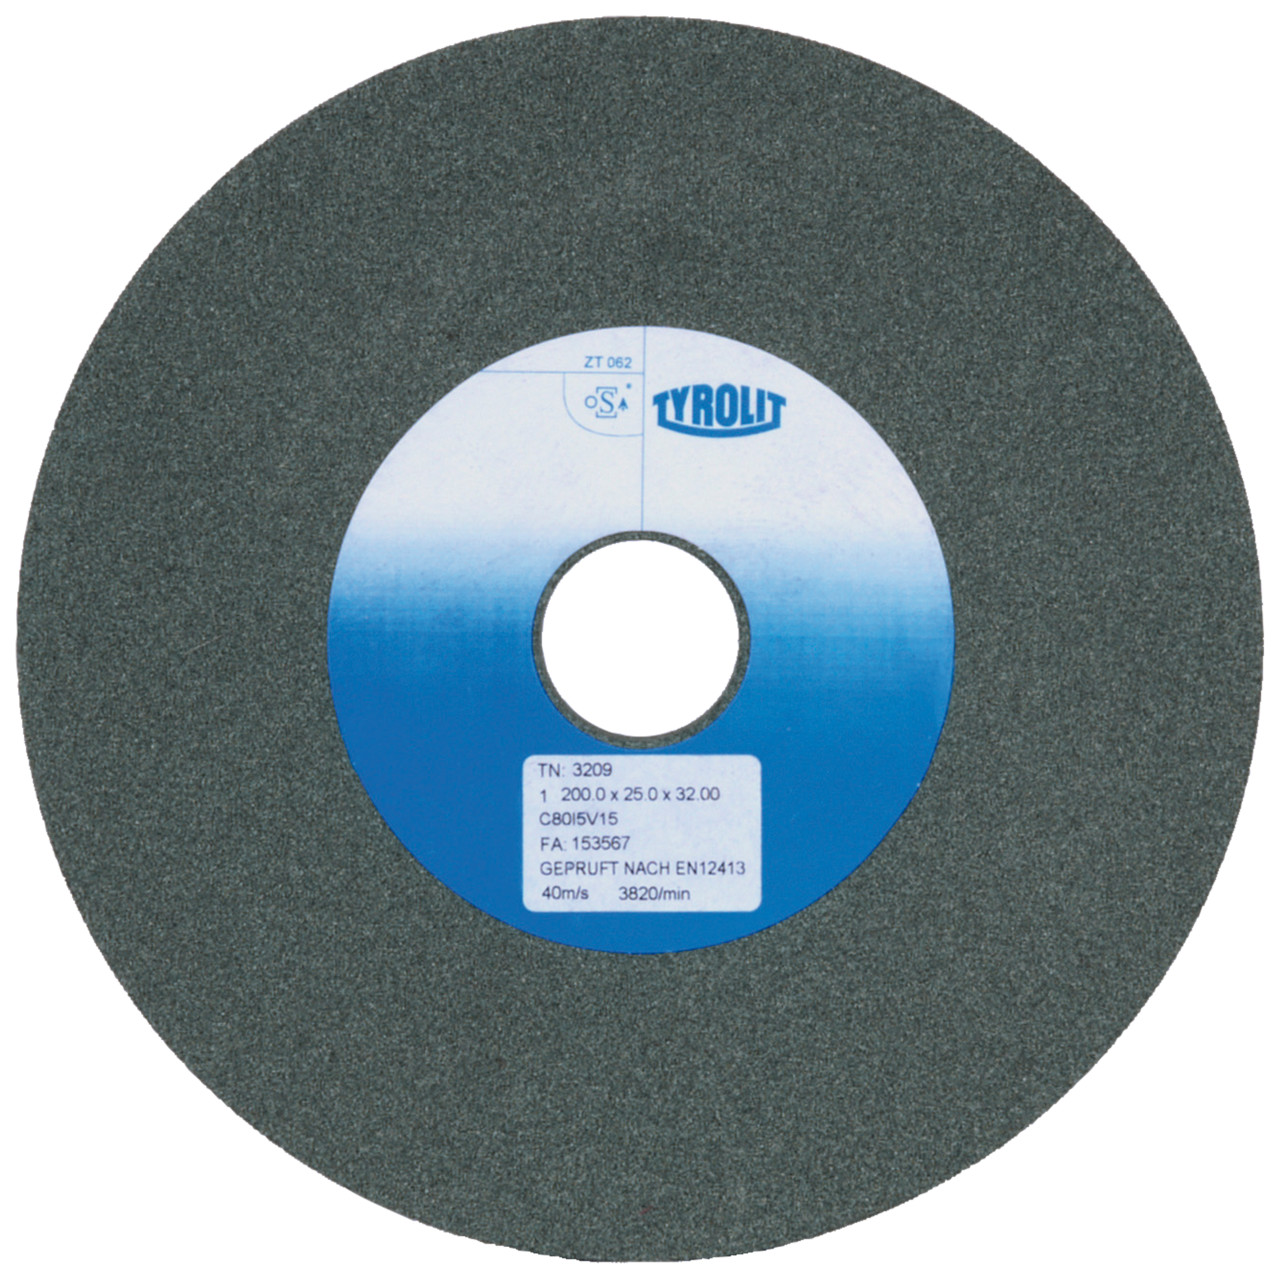 Tyrolit Conventional ceramic grinding discs DxDxH 150x25x32 For carbide and cast iron, shape: 1, Art. 2753